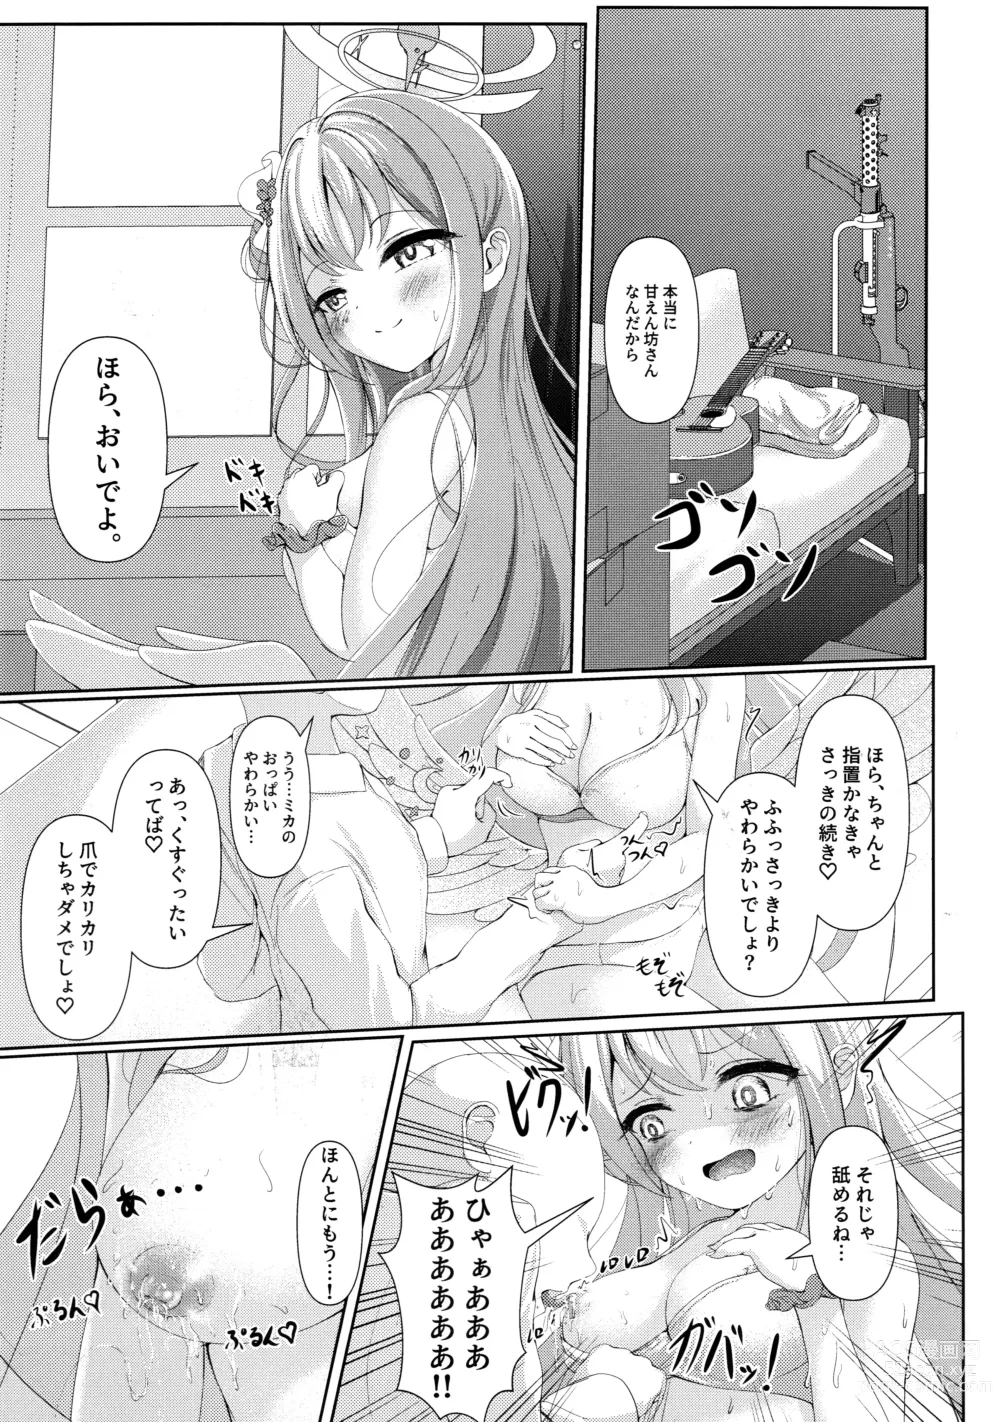 Page 10 of doujinshi Sleeping with the Dear Constellation.